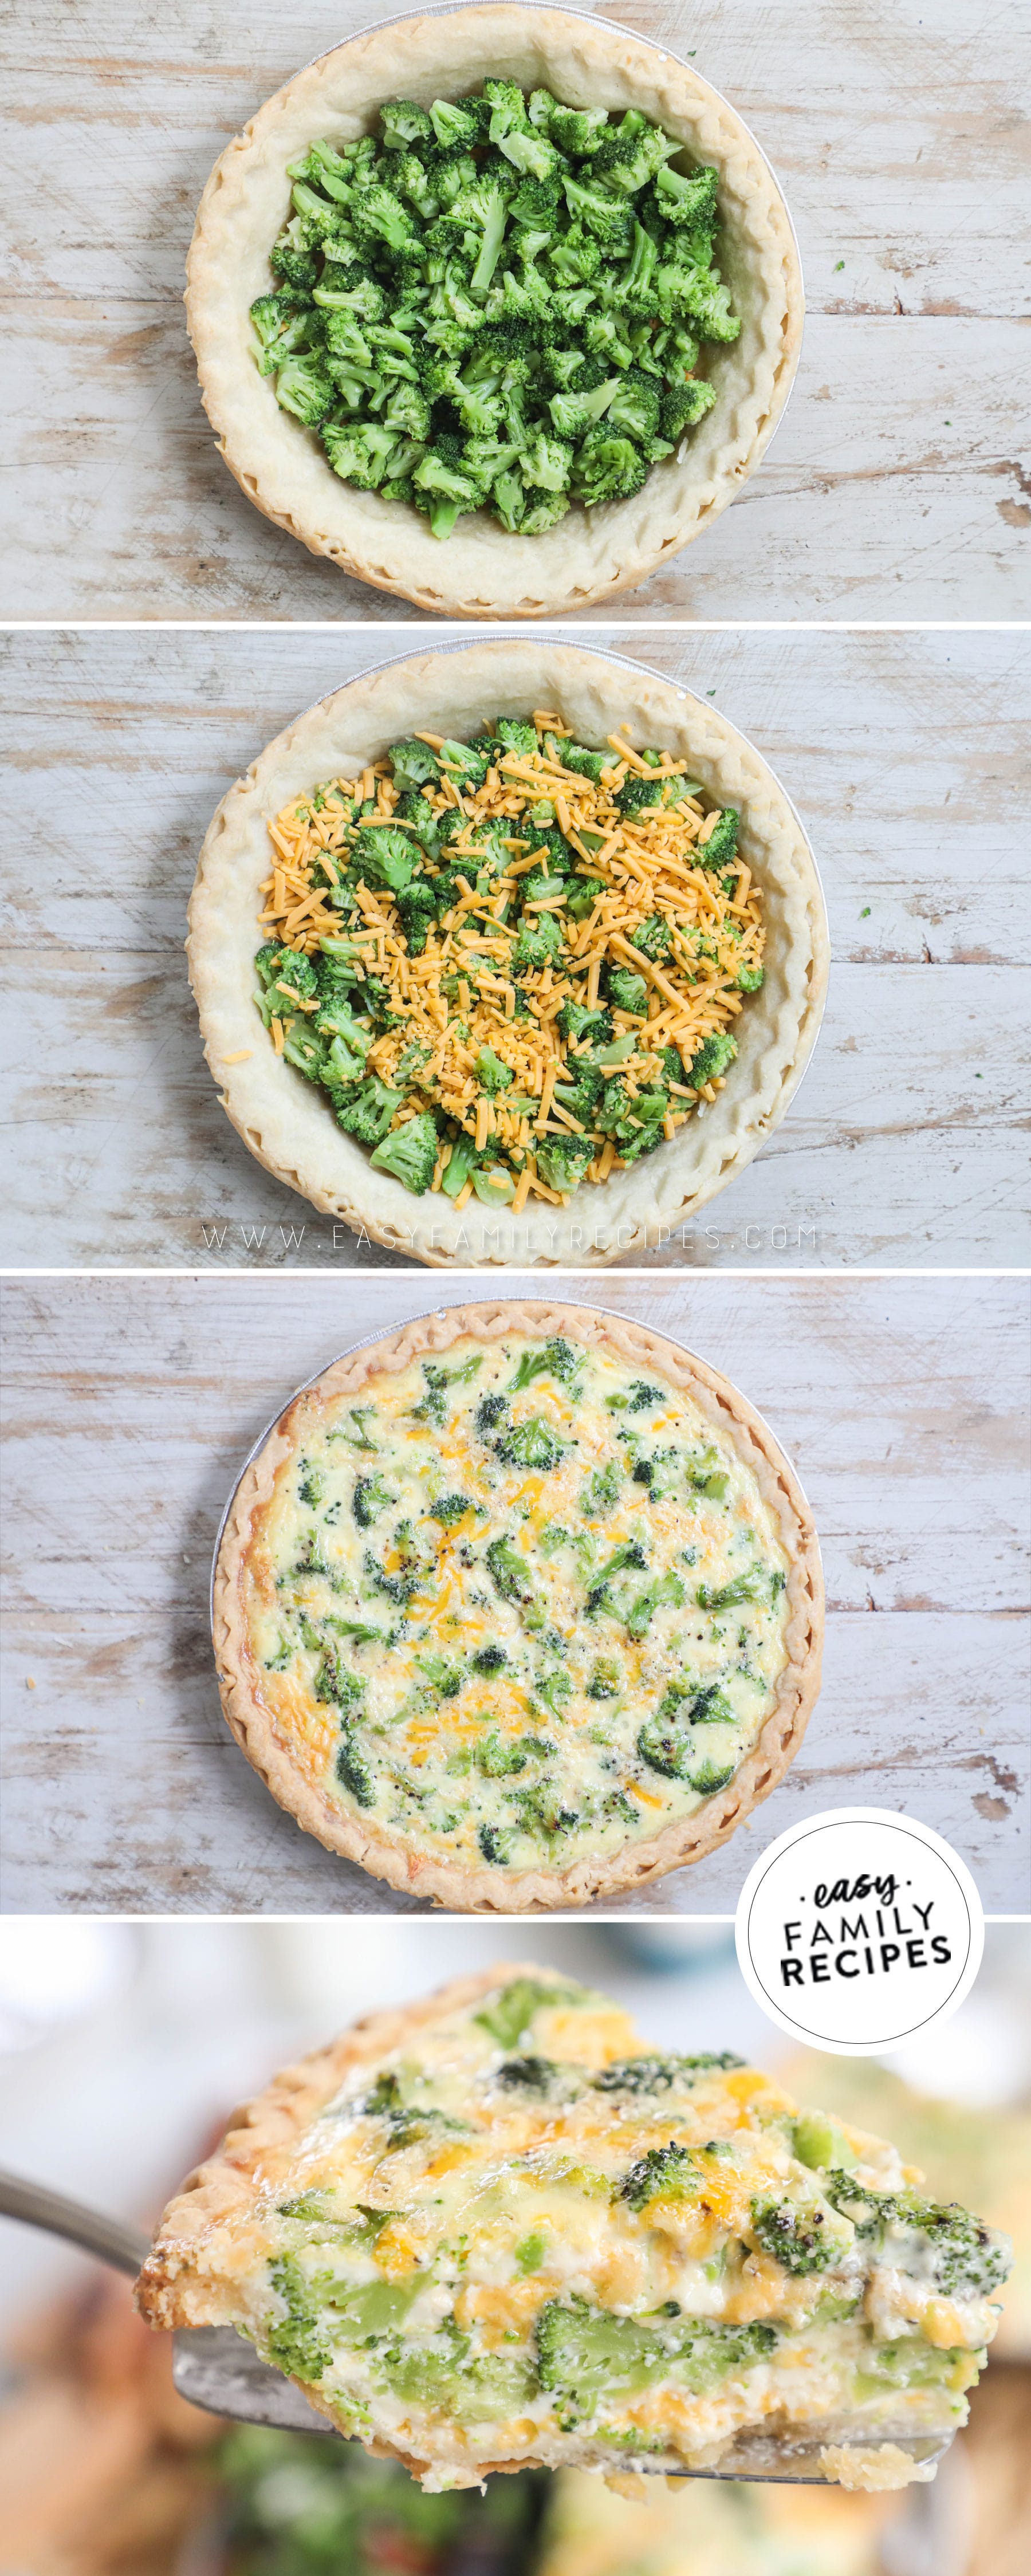 Step by step how to make broccoli cheddar quiche with step 1, lay the filling on the bottom of the crust evenly, step 2 pour the egg mixture over it, step 3 bake it , step 4 let it rest.